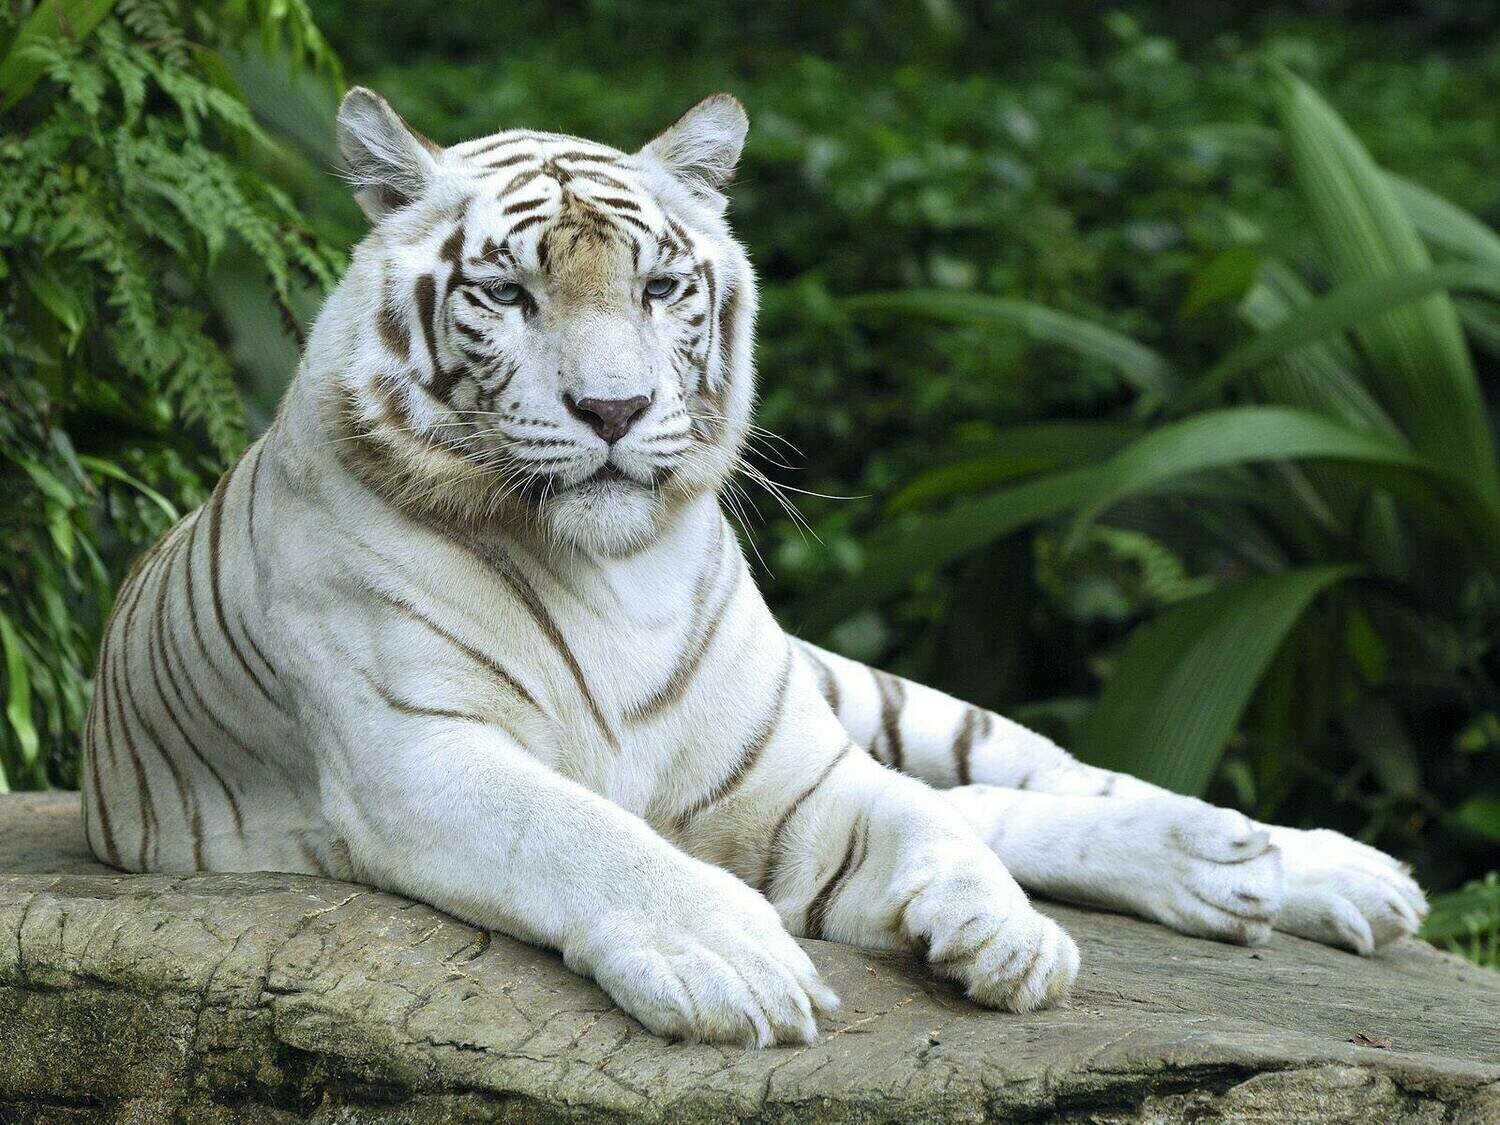 White tiger 01 - Specially ordered for you. Delivery is approximately 4 - 6 weeks.